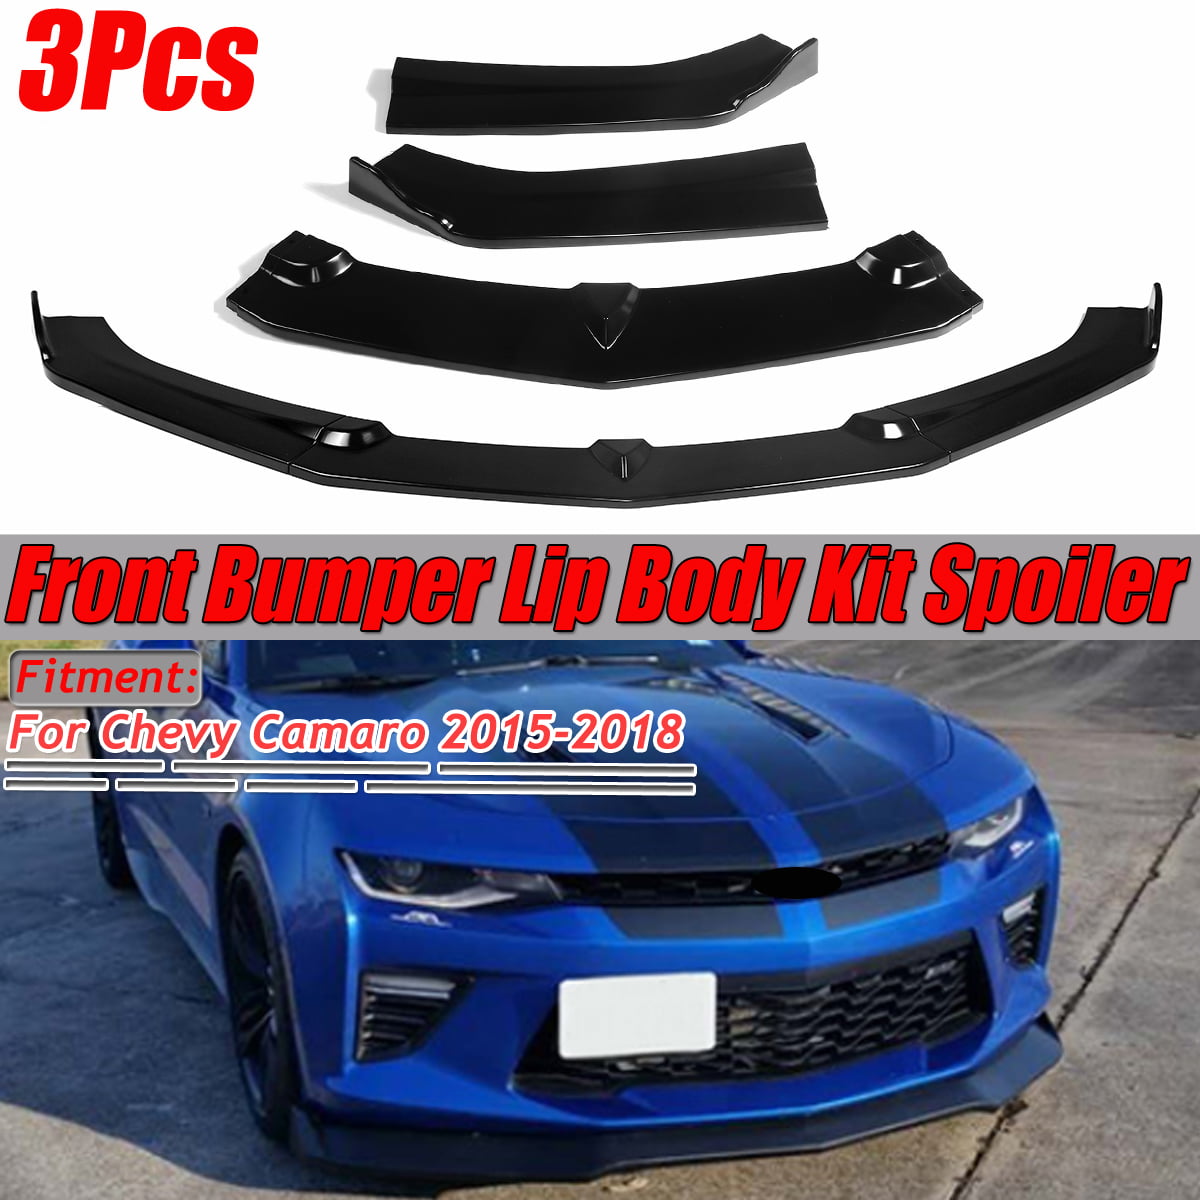 Removable License Plate Bracket 2016-2018 Chevy Camaro w/ Ground Effects & 1LE